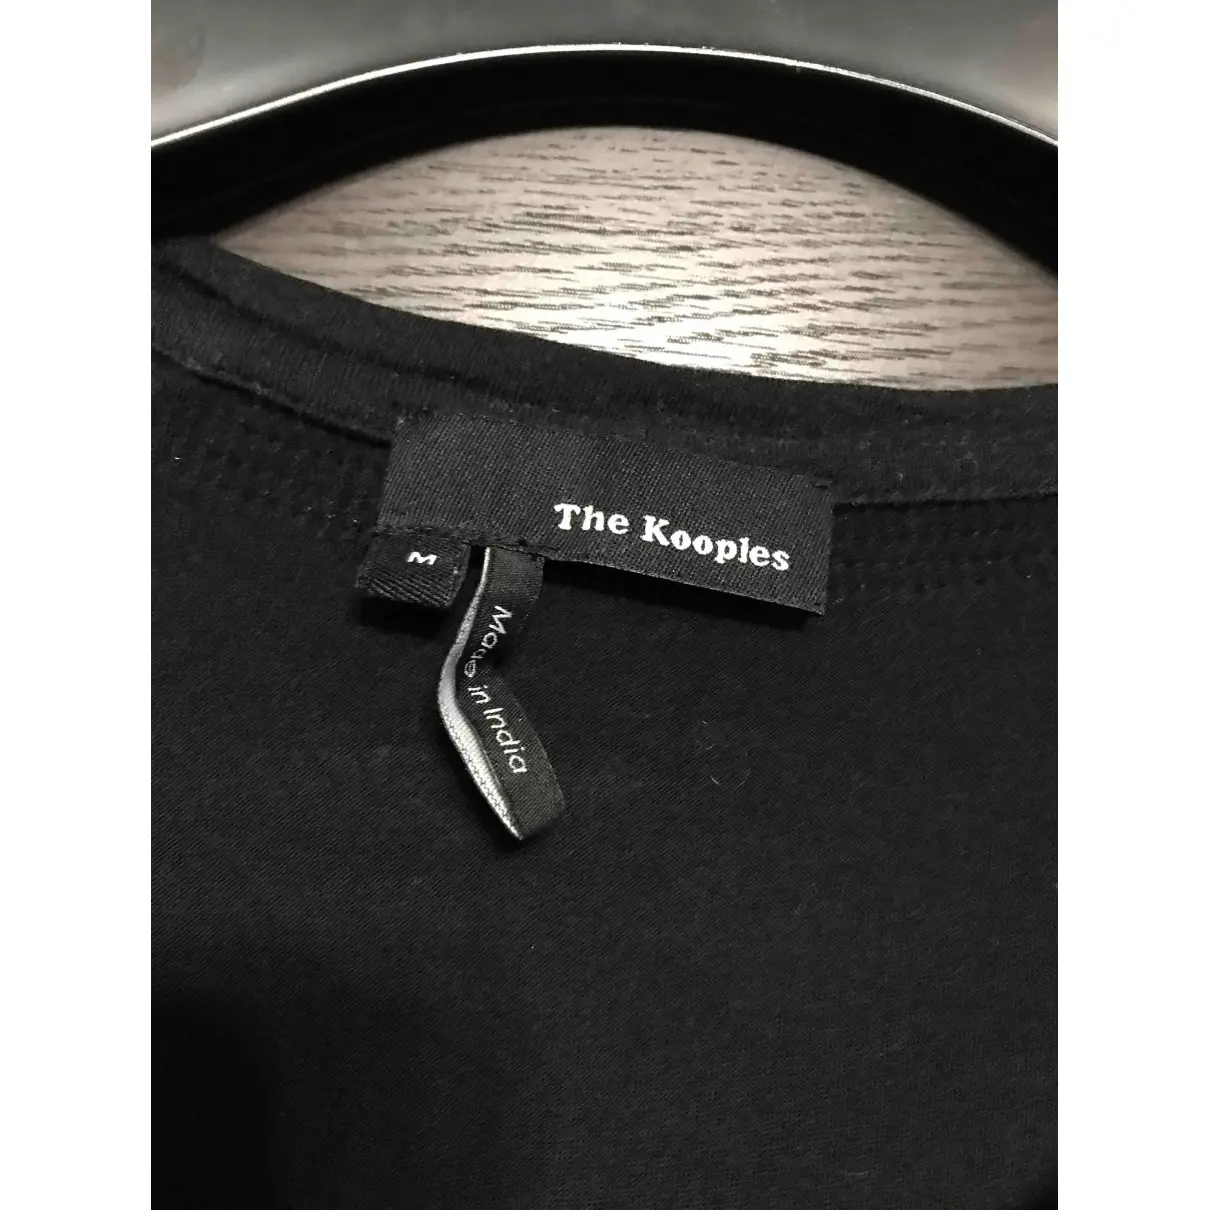 The Kooples T-shirt for sale